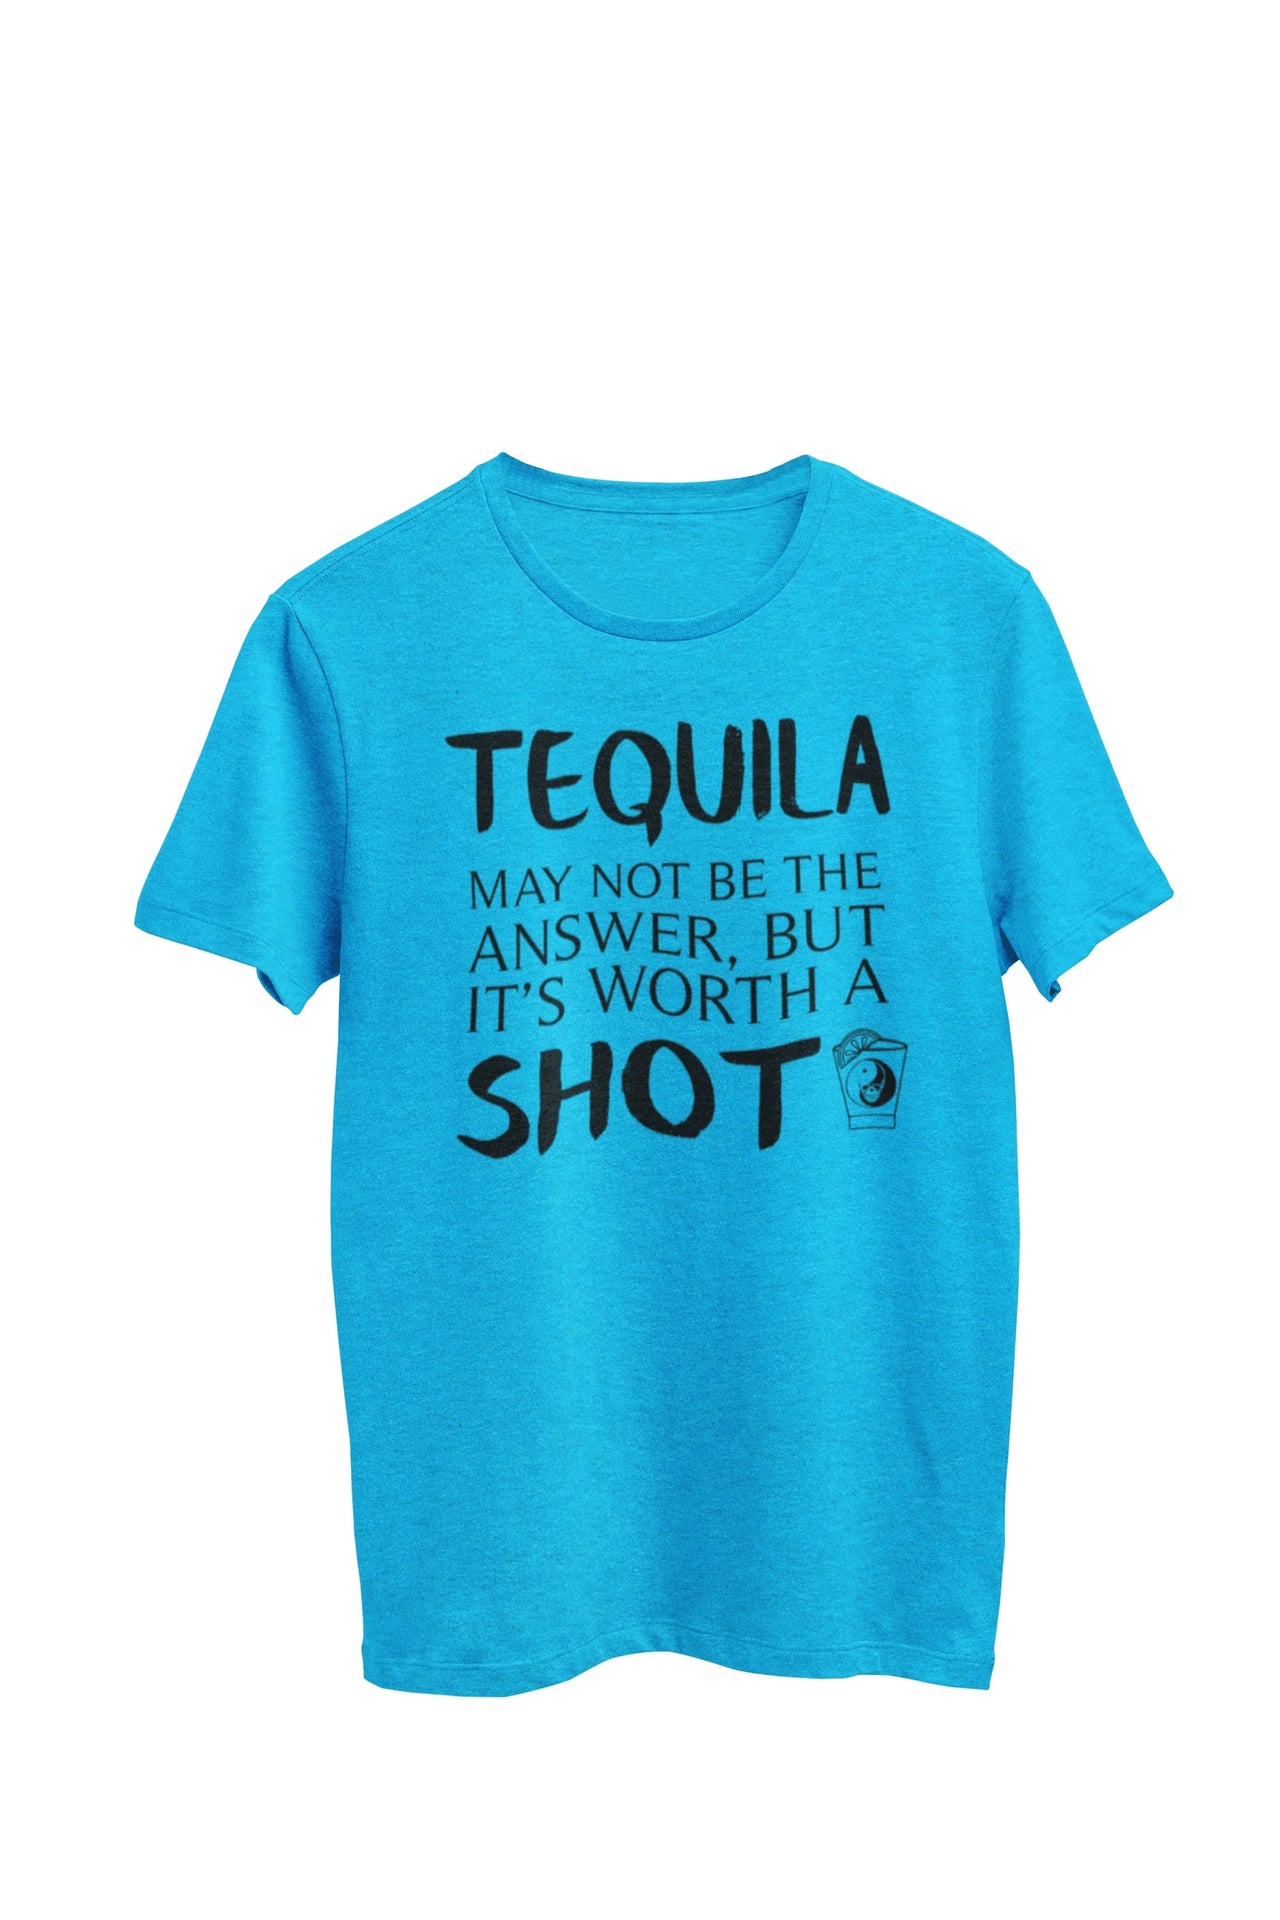 Turquoise Heather Unisex T-shirt with text: 'Tequila may not be the answer, but it's worth a shot.' The design features a shot glass with a yin yang symbol, created by WooHoo Apparel.